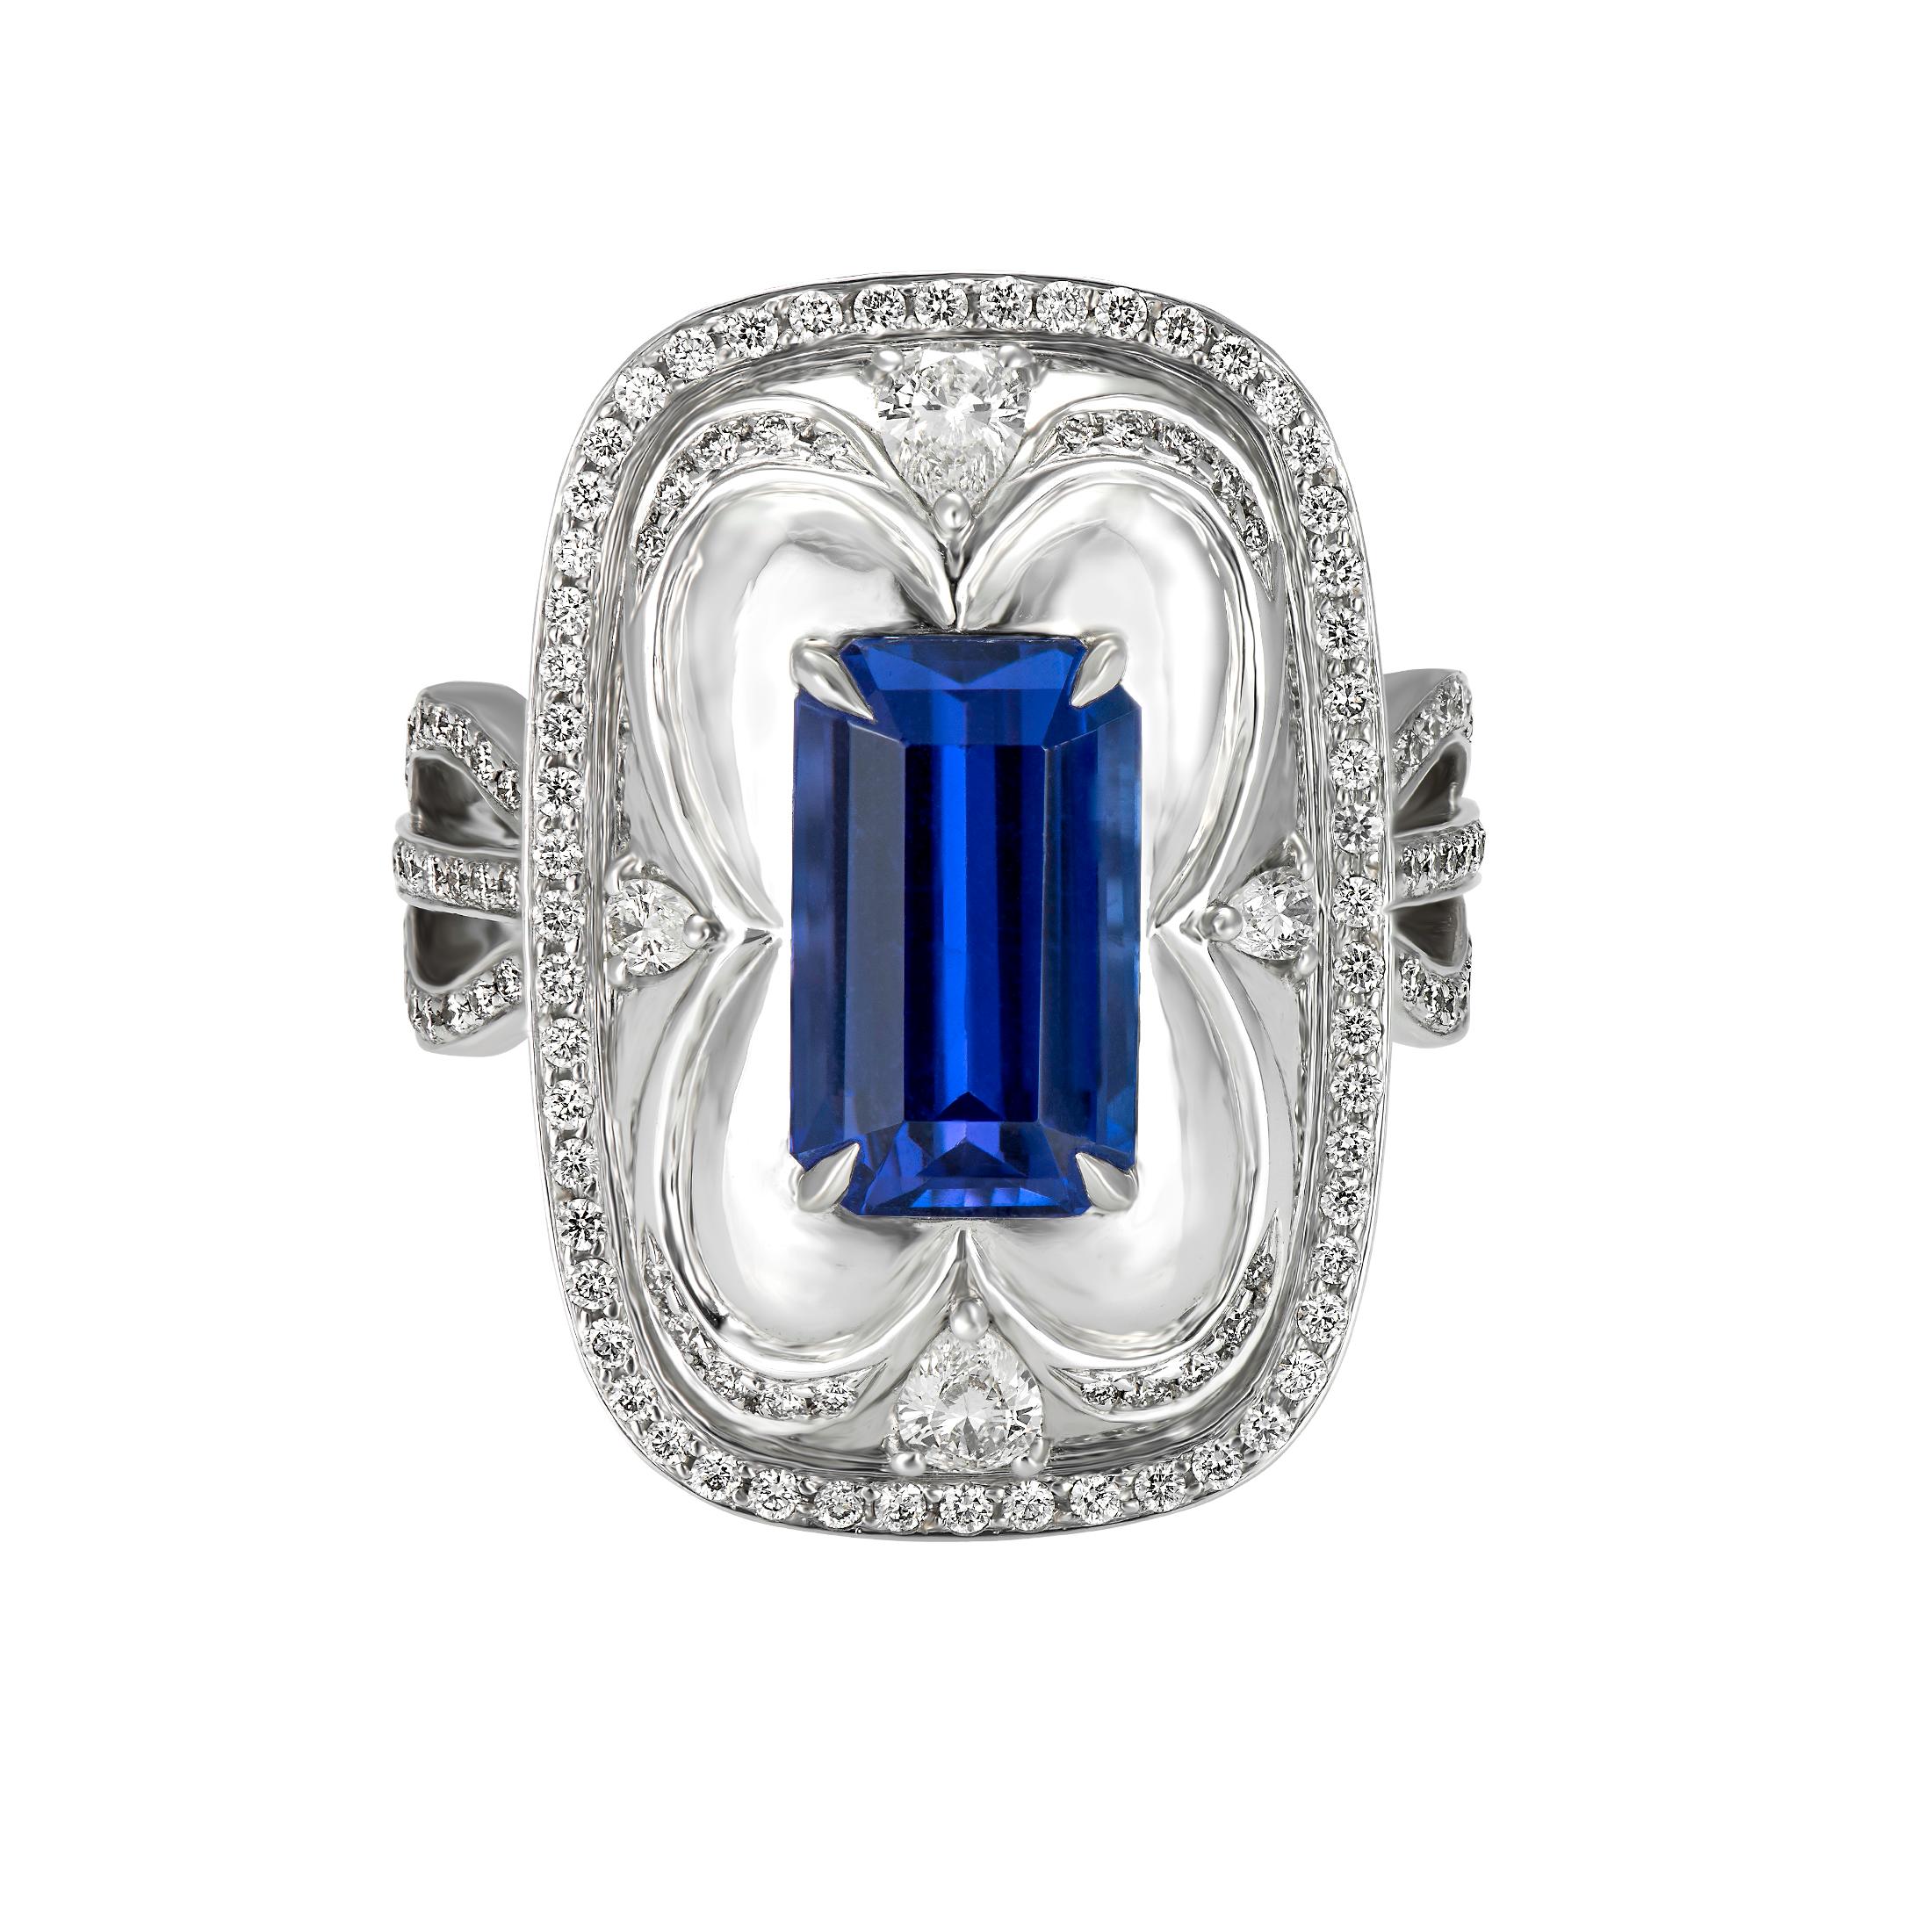 18 Karat white gold Tanzanite and diamond cocktail ring from Laviere's Ultramarine Collection. The ring is set with a perfect  3.36 carat tanzanite and 0.81 carat diamonds. 

Gross Weight of the ring: 13.98  grams. The ring is accompanied by the